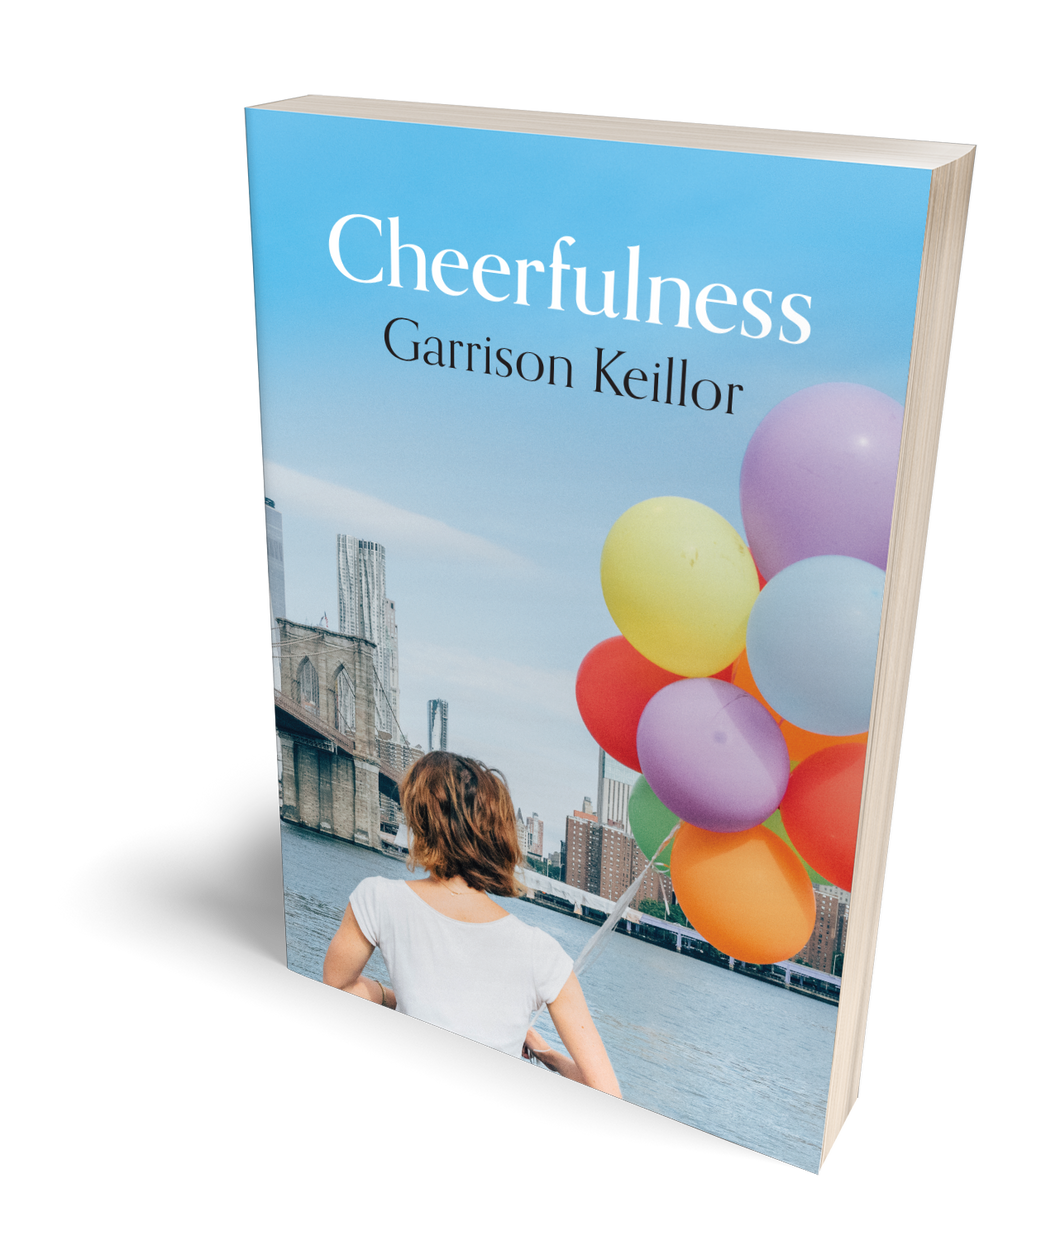 AUTOGRAPHED COPY of Cheerfulness by Garrison Keillor